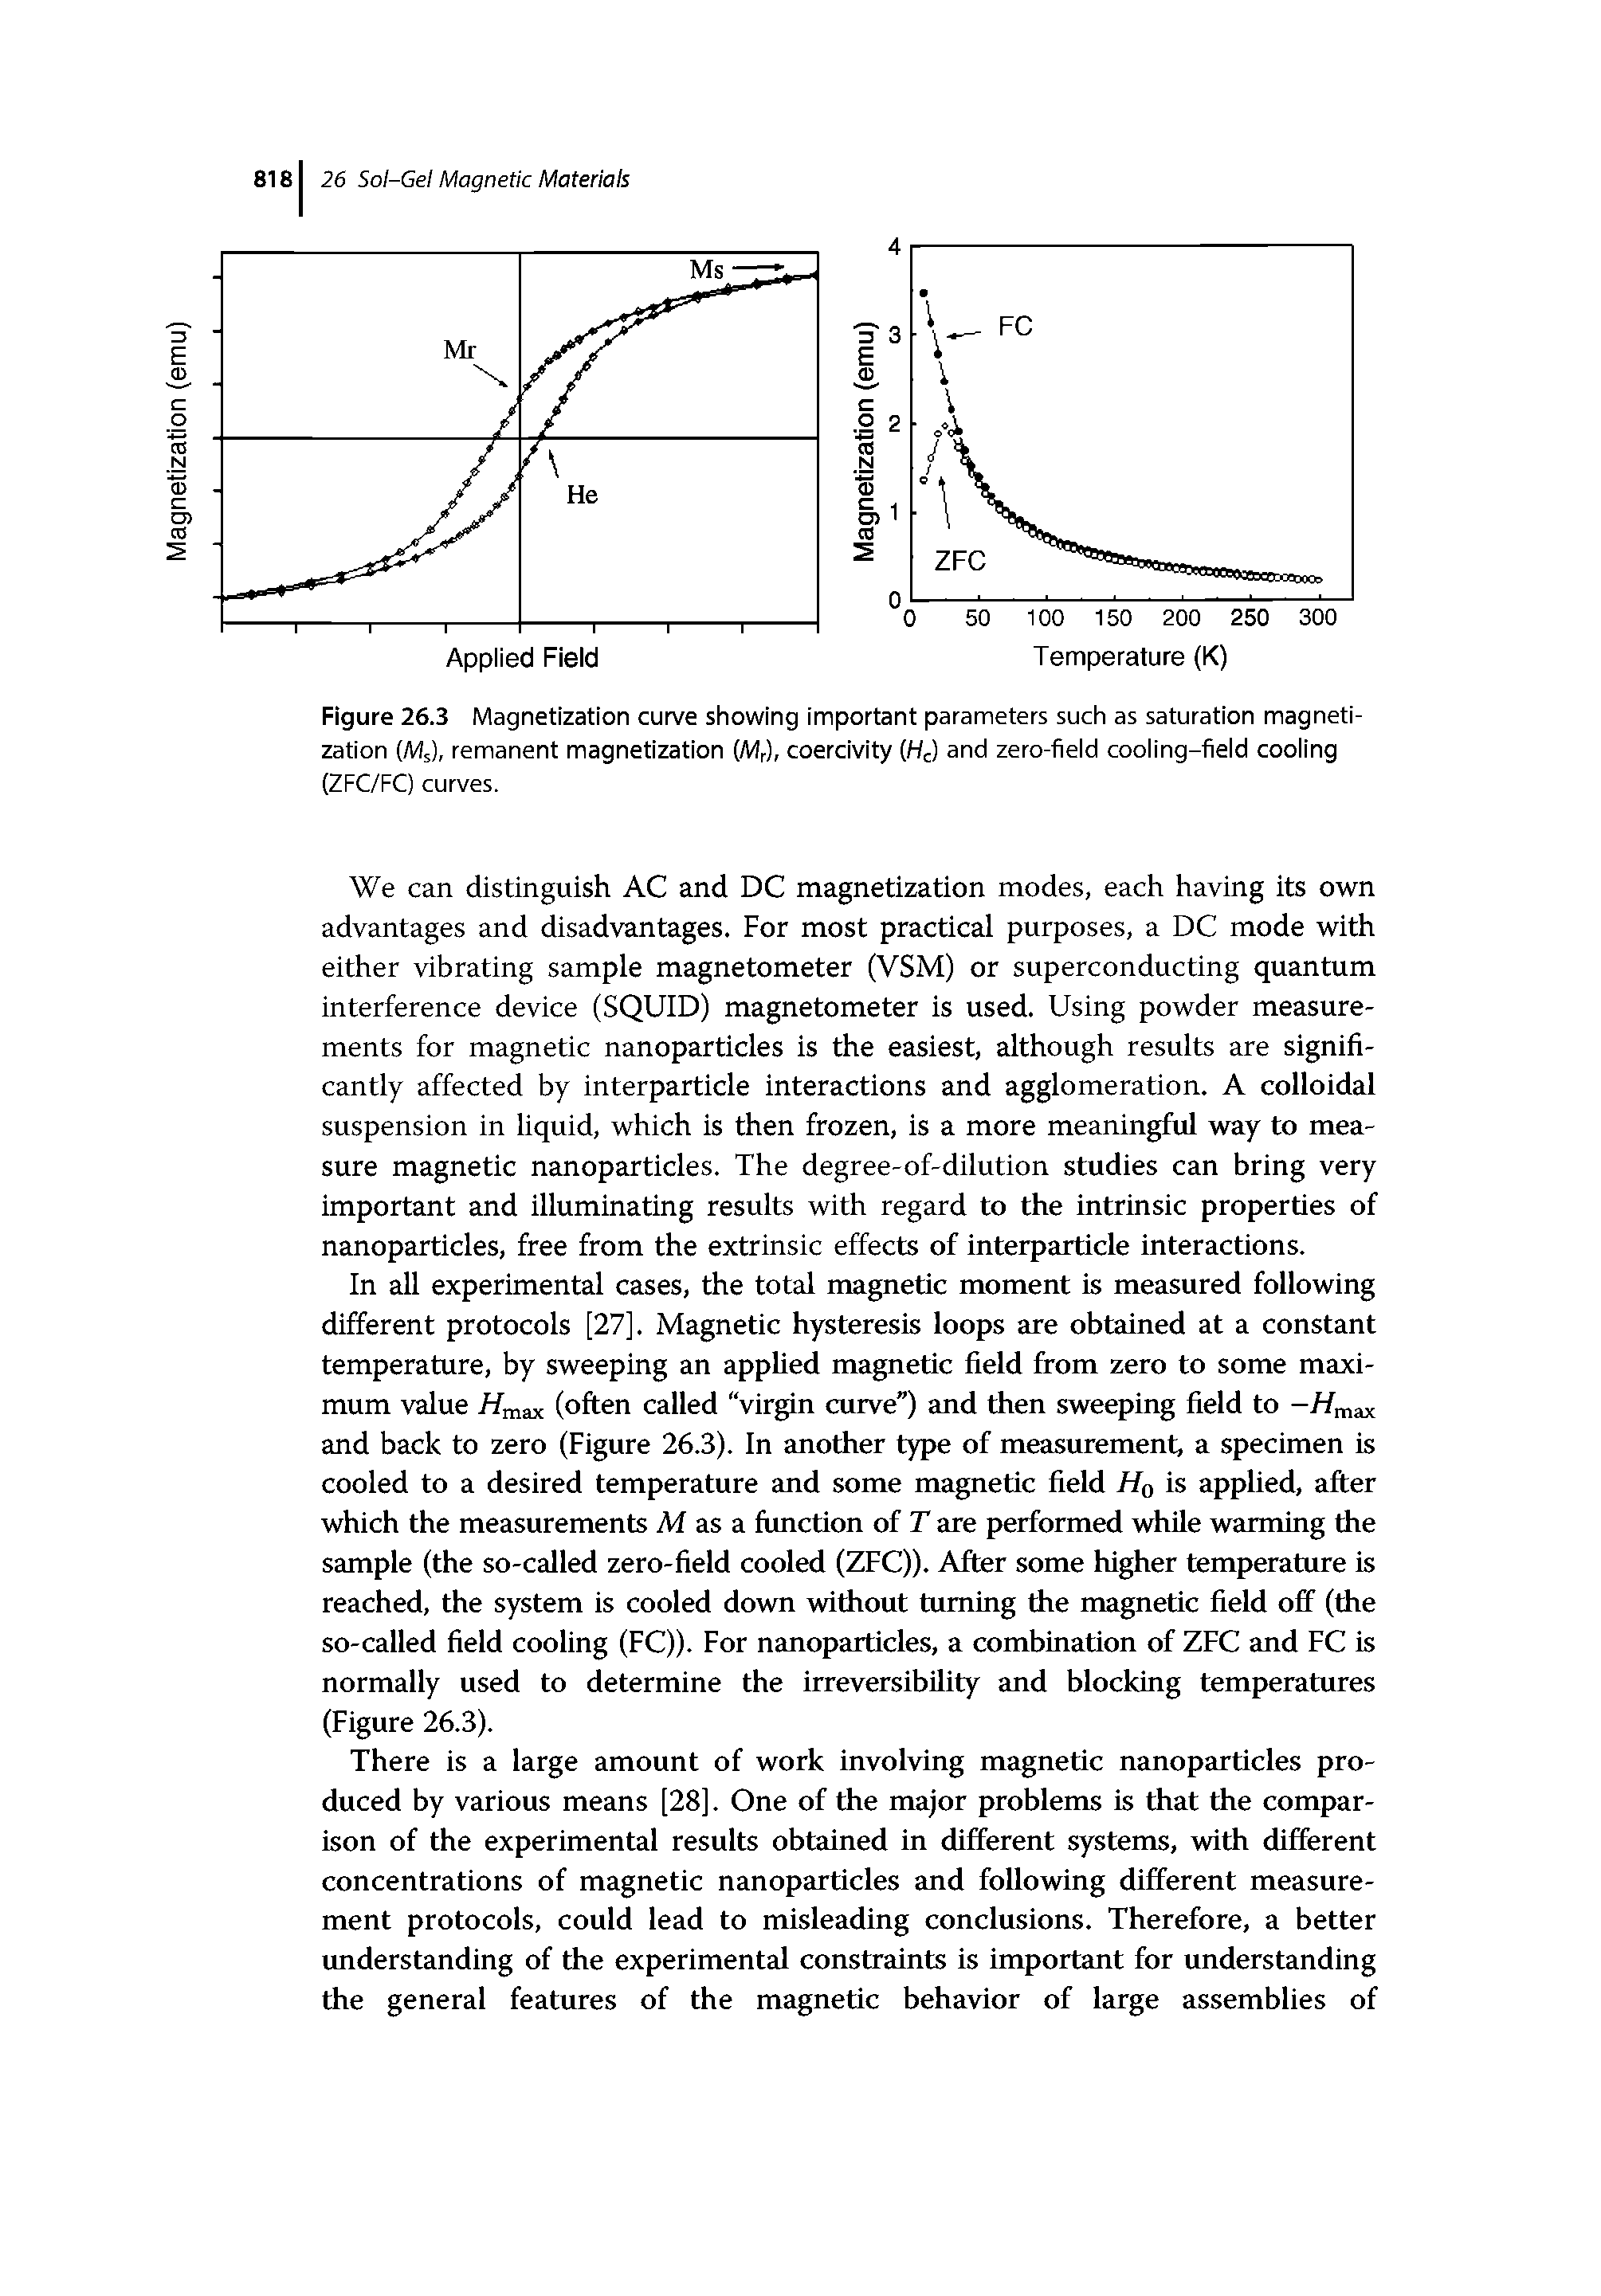 Figure 26.3 Magnetization cunre showing important parameters such as saturation magnetization (Ms), remanent magnetization (MJ, coercivity (HJ and zero-field cooling-field cooling (ZFC/FC) curves.